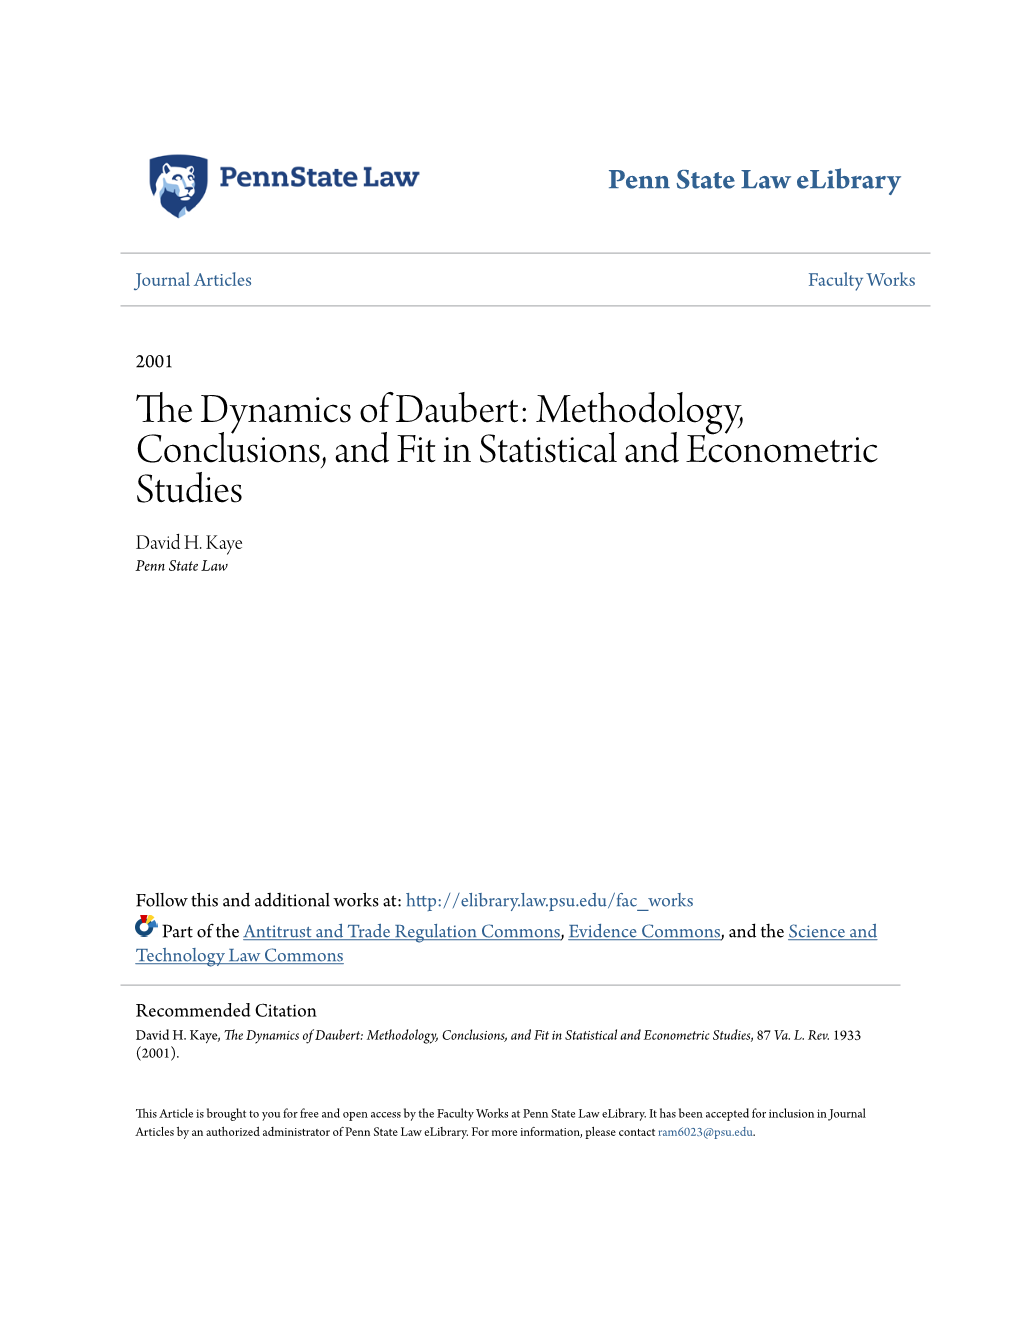 The Dynamics of Daubert: Methodology, Conclusions, and Fit in Statistical and Econometric Studies David H